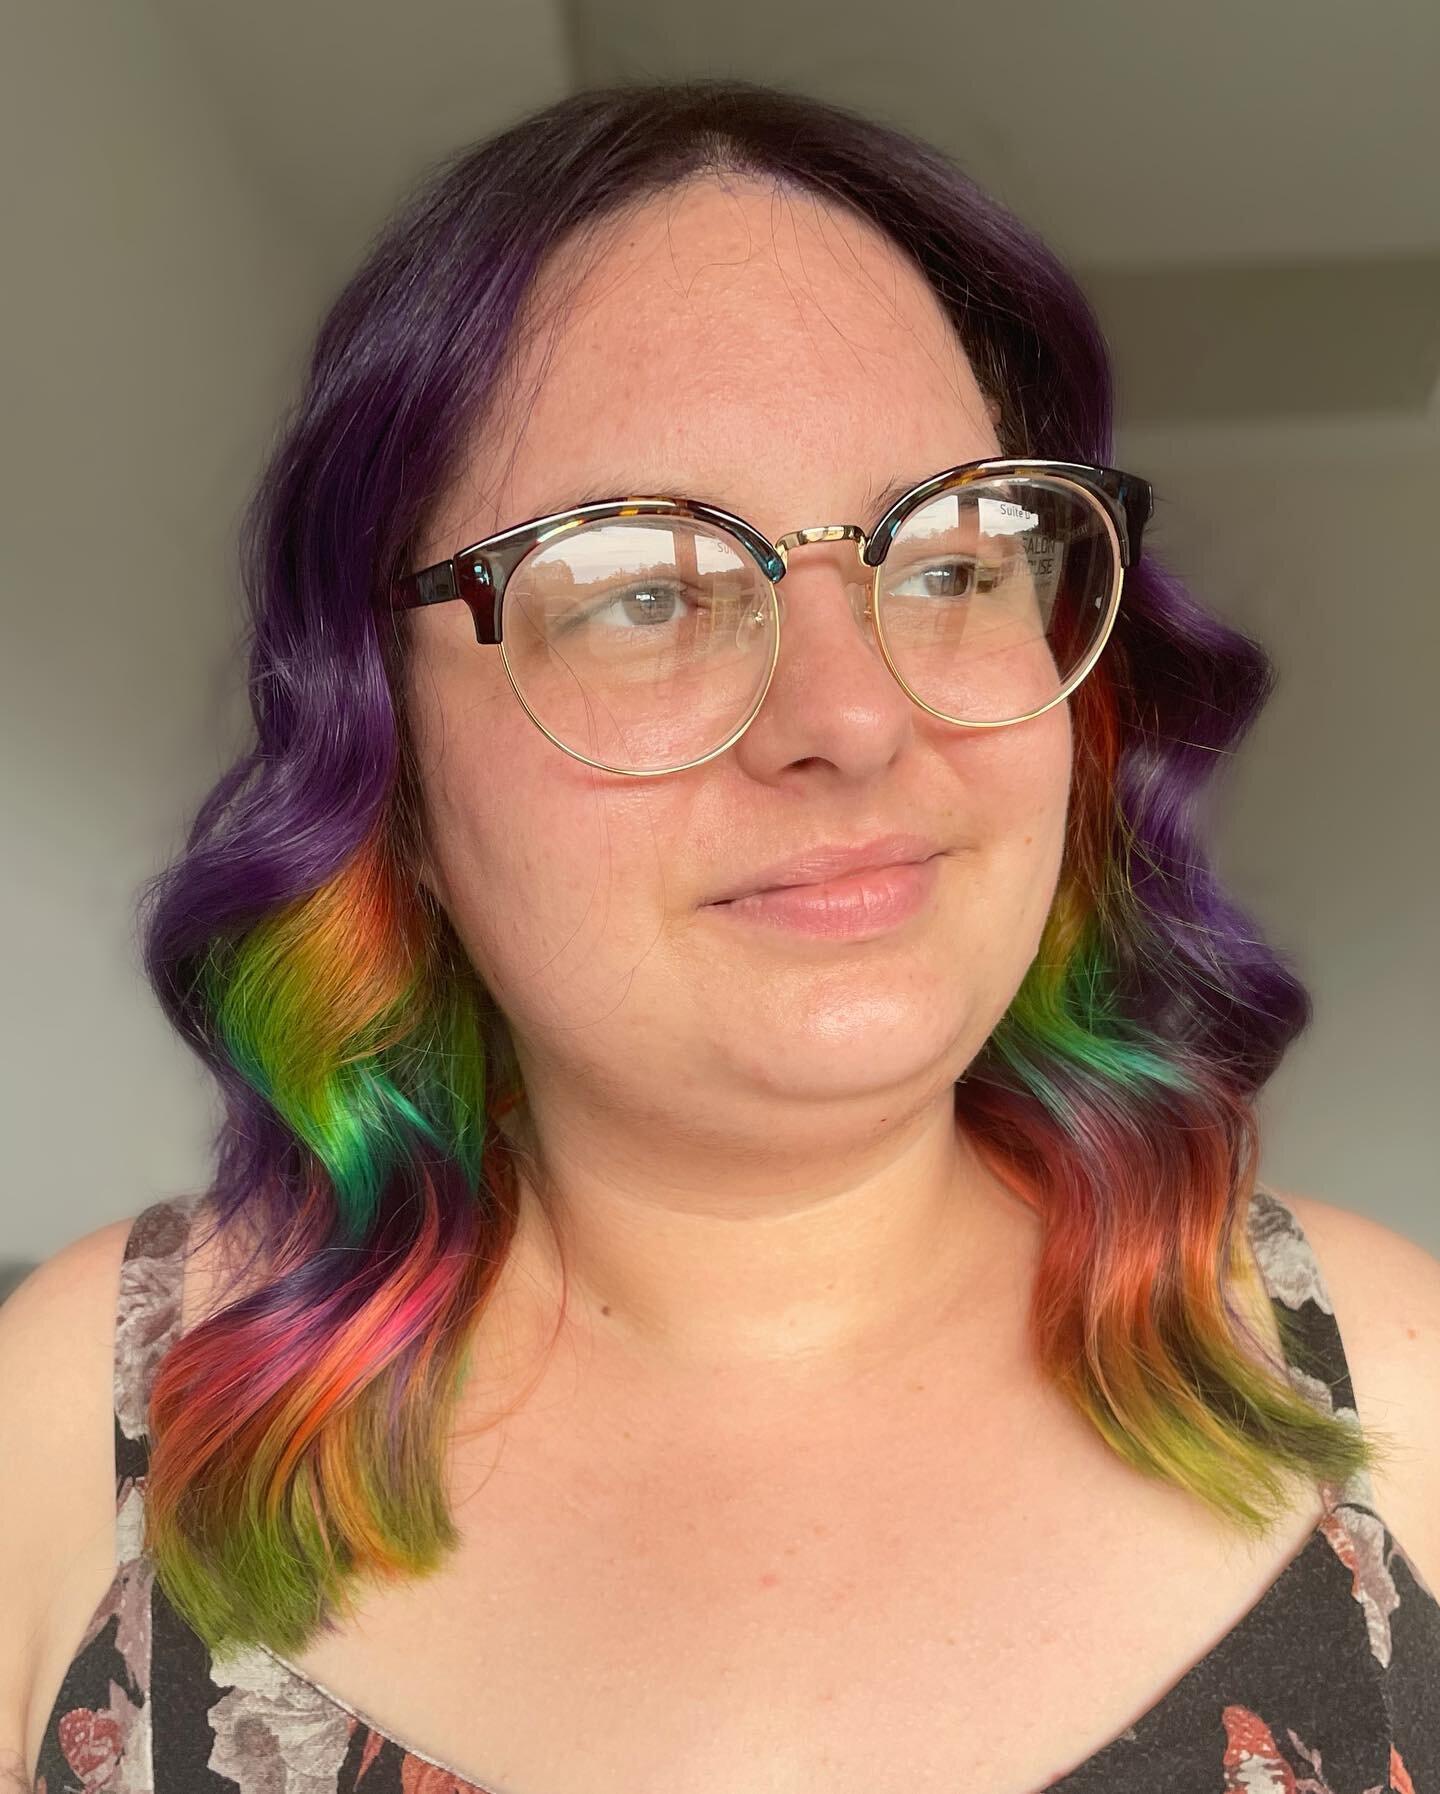 Nothing beats rainbows!!

Fun fact: I only colored Jenna&rsquo;s hair twice last year. A full bleach and vivid application in the spring, and a vivid refresh without bleaching in the fall. Her hair never looks faded though because she takes Excellent